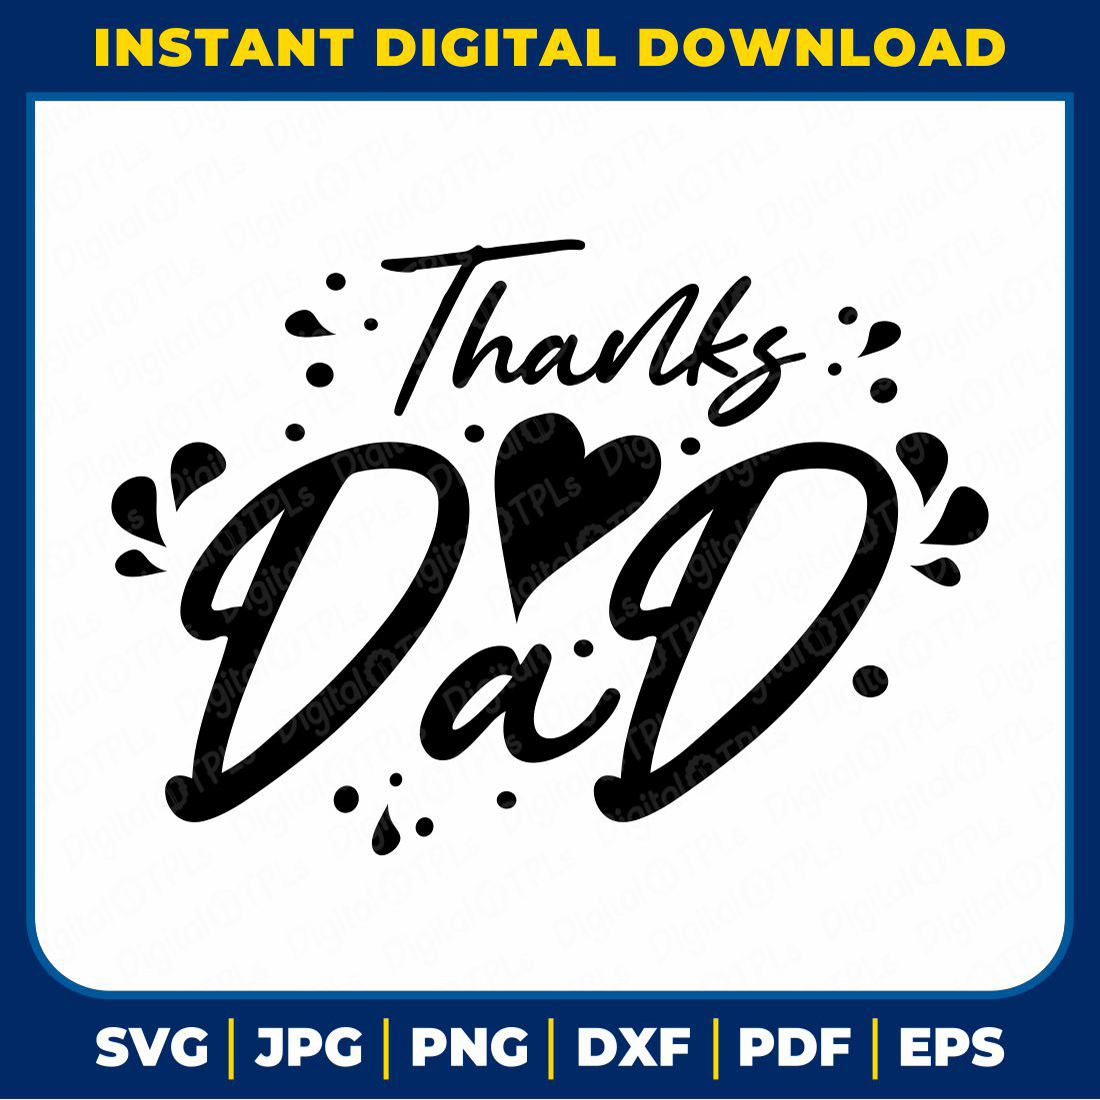 Thanks Dad SVG | Father’s Day SVG, DXF, EPS, JPG, PNG & PDF Files cover image.